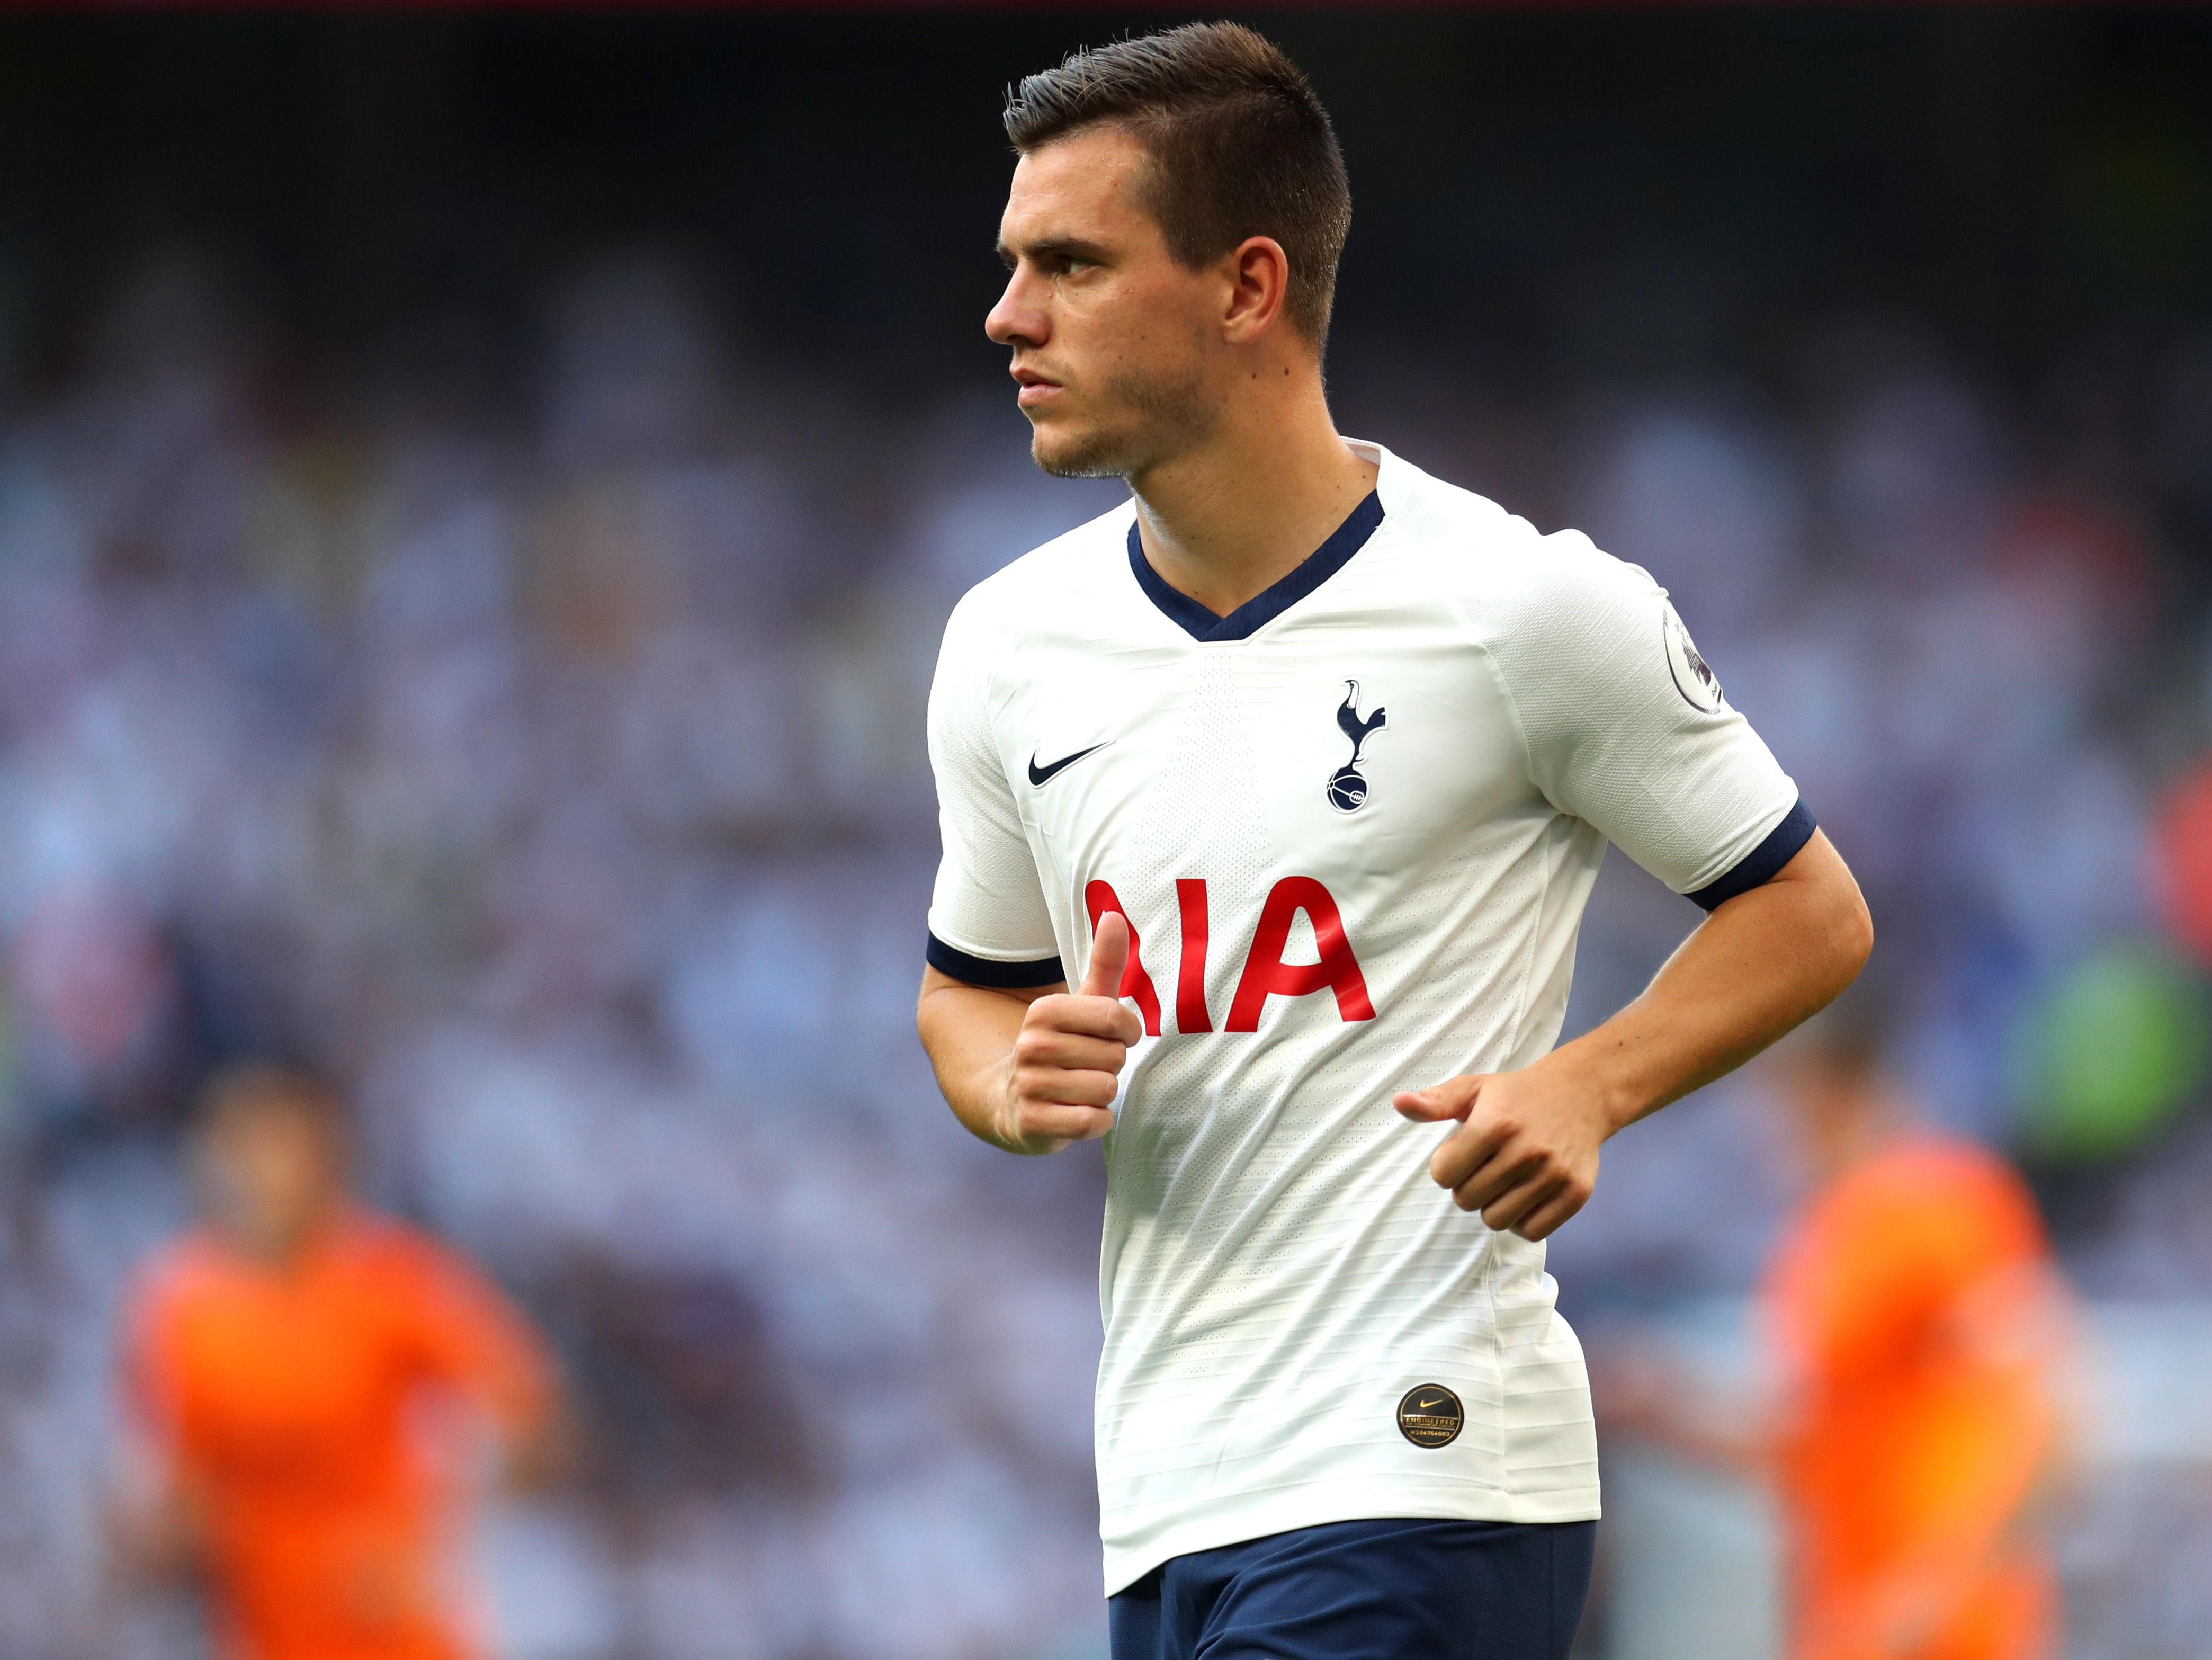 Lo Celso will be key for Tottenham to unlock the hosts' defence (Photo by Catherine Ivill/Getty Images)